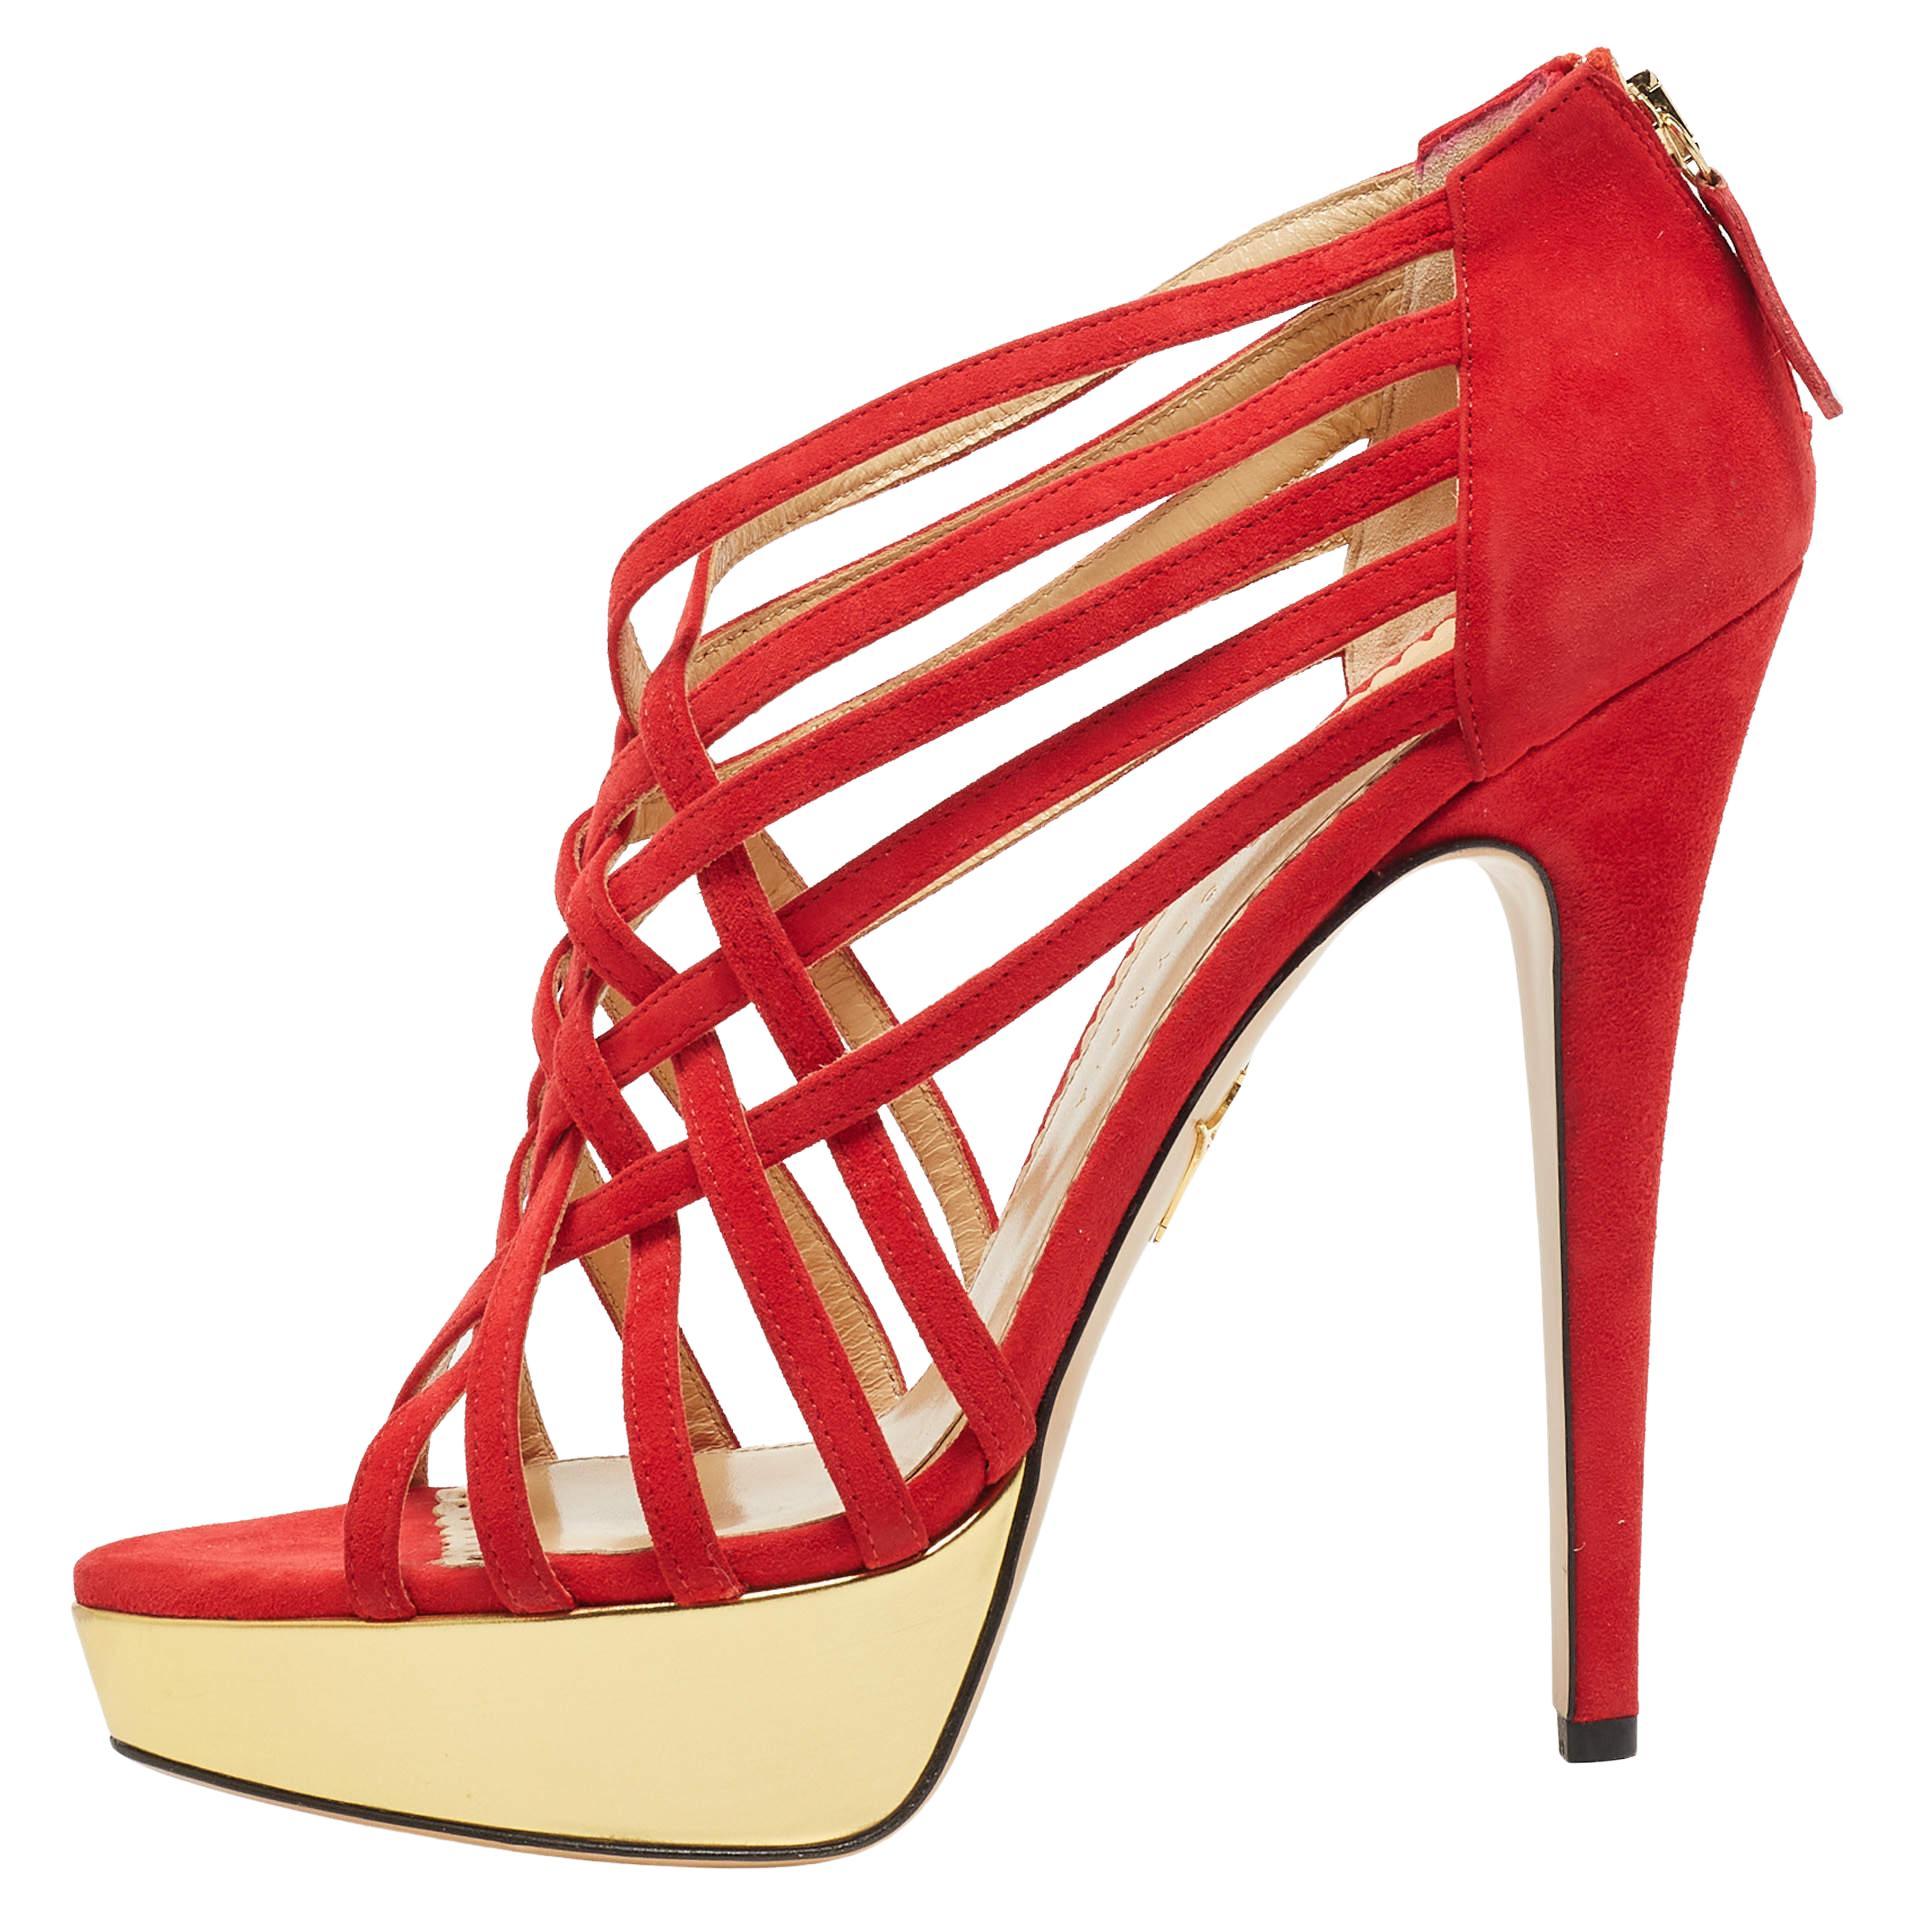 Charlotte Olympia Red Suede Strappy Platform Sandals Size 40 For Sale